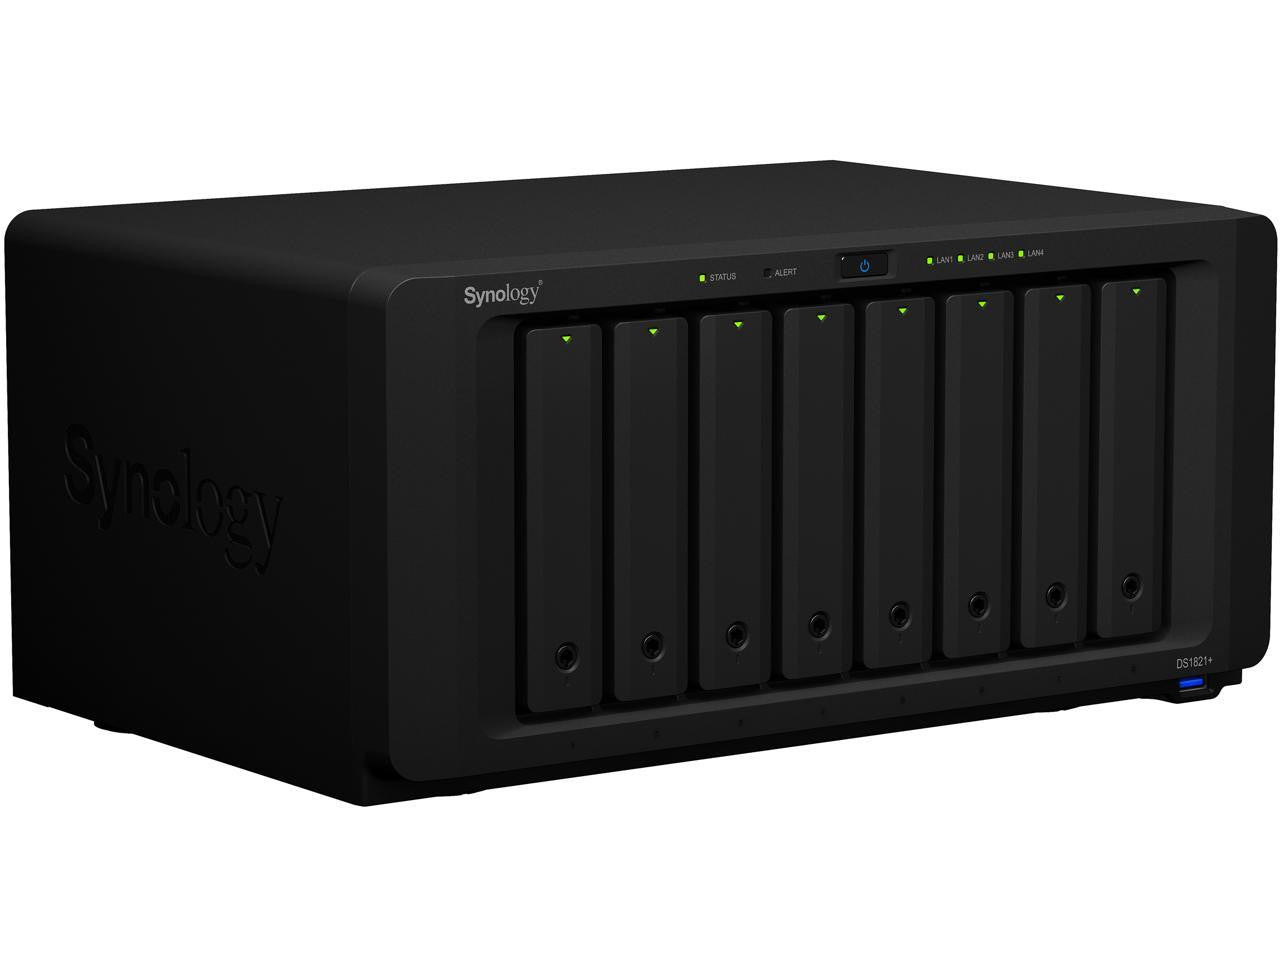 Synology DS1821+ 8-BAY DiskStation with 4GB Synology RAM and 24TB (8x3TB) Western Digital RED PLUS Drives Fully Assembled and Tested